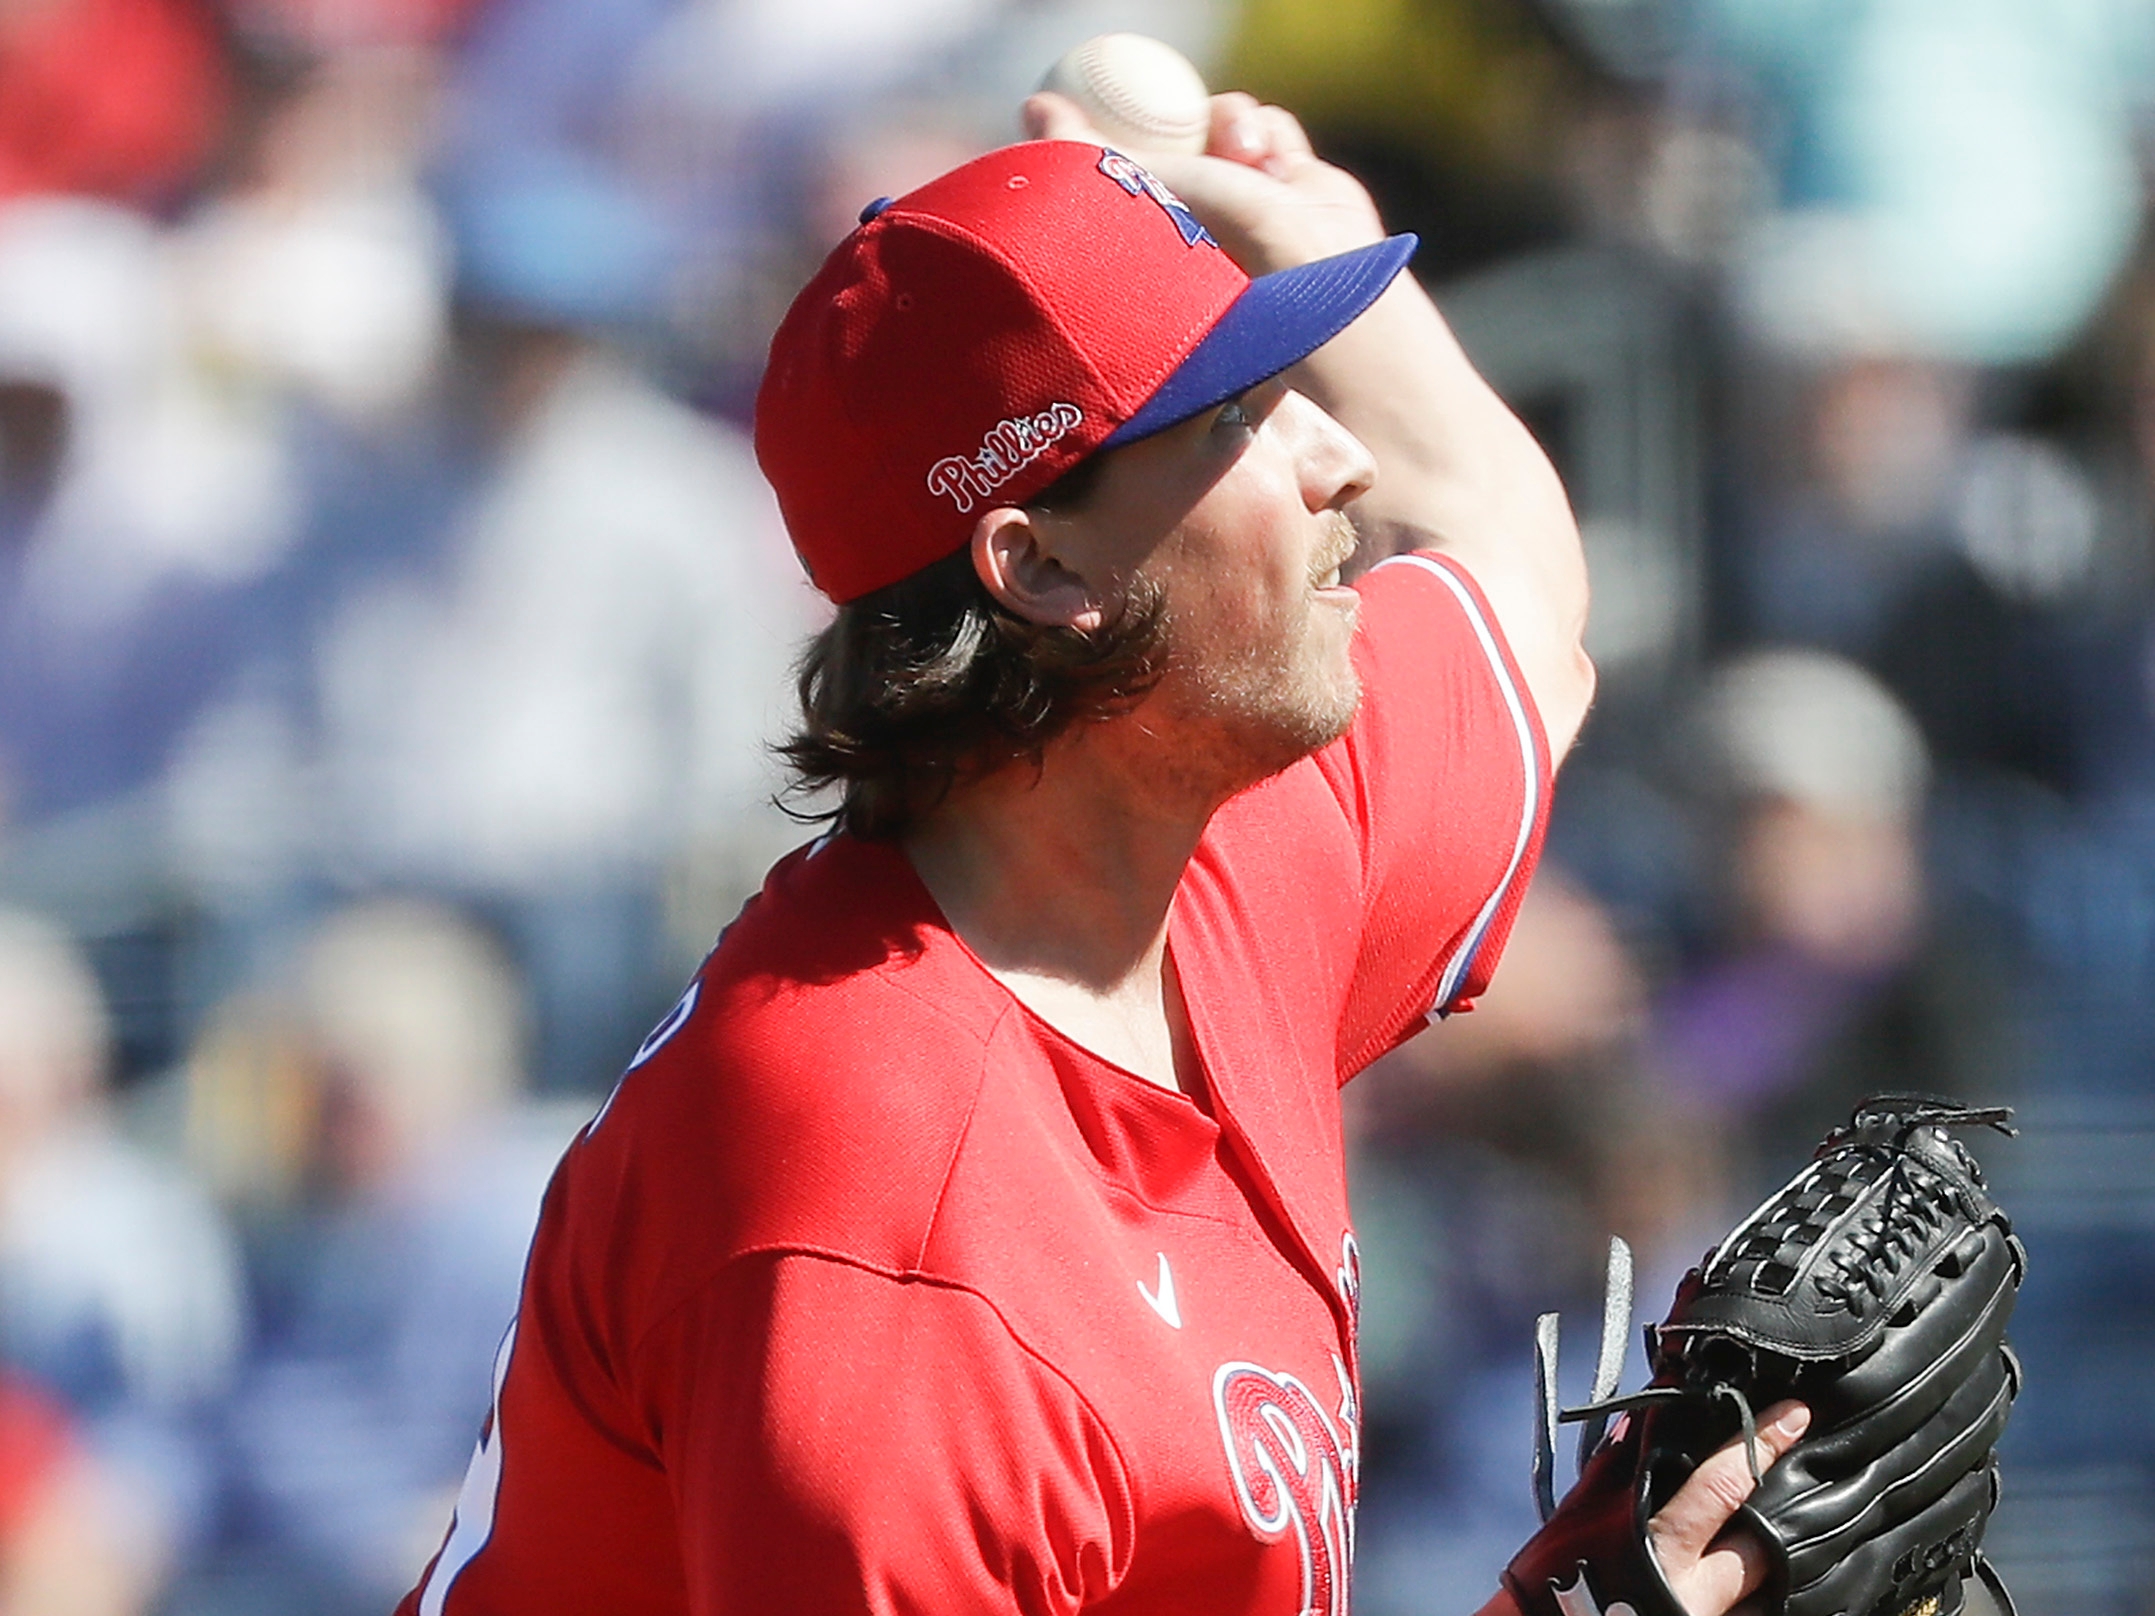 Phillies news and rumors 5/31: Matt Vierling to miss upcoming Phillies  series with injury  Phillies Nation - Your source for Philadelphia  Phillies news, opinion, history, rumors, events, and other fun stuff.